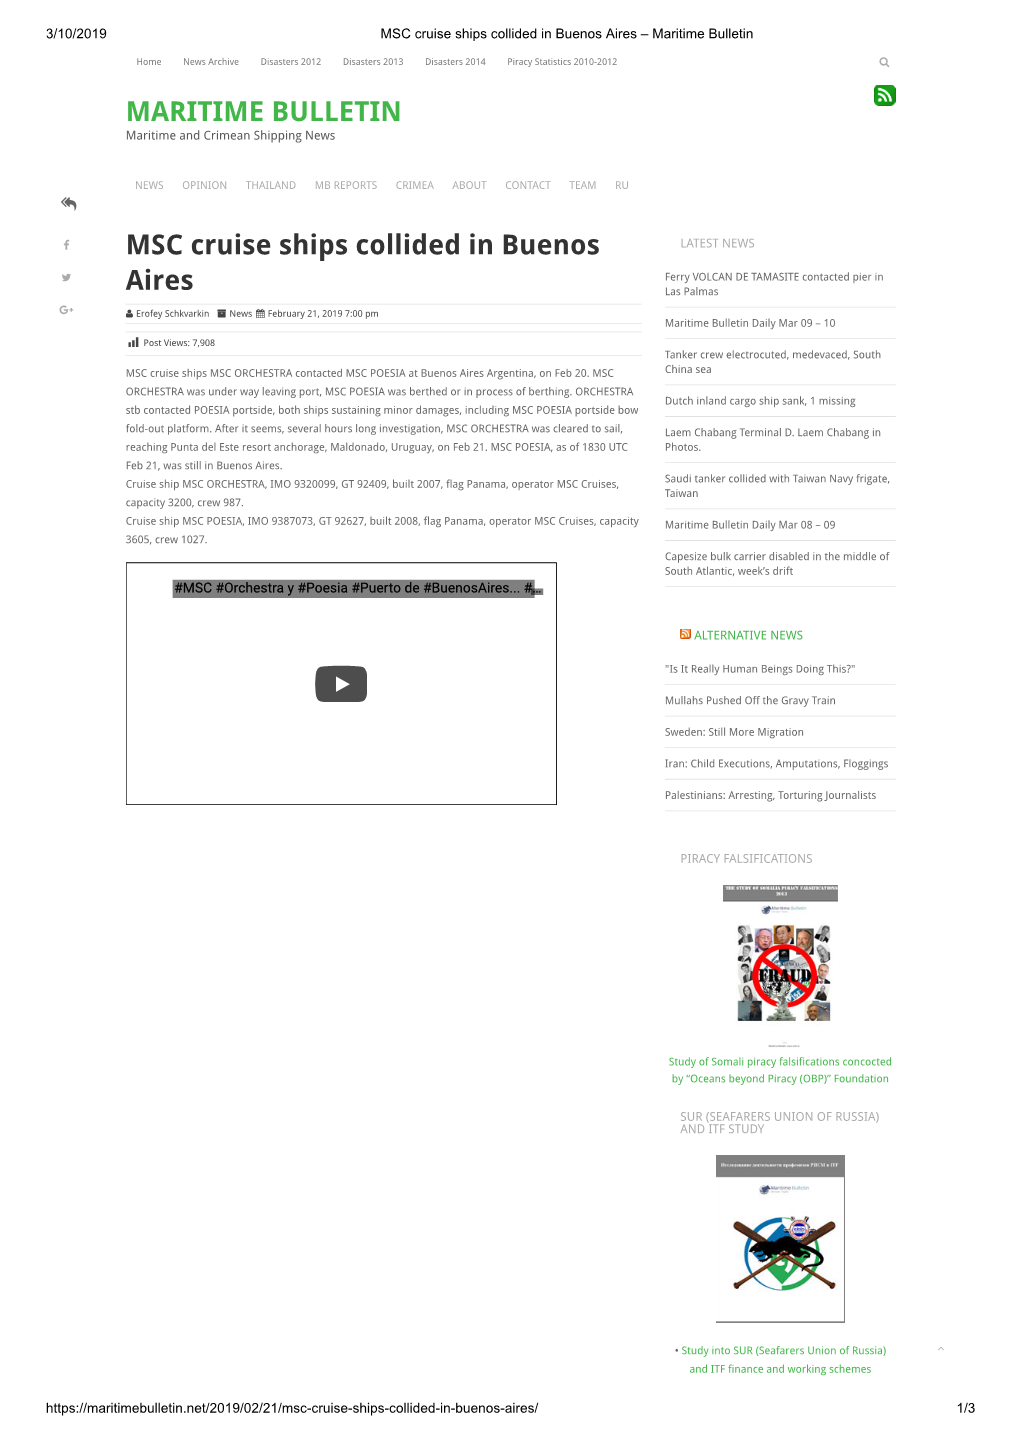 MARITIME BULLETIN MSC Cruise Ships Collided in Buenos Aires